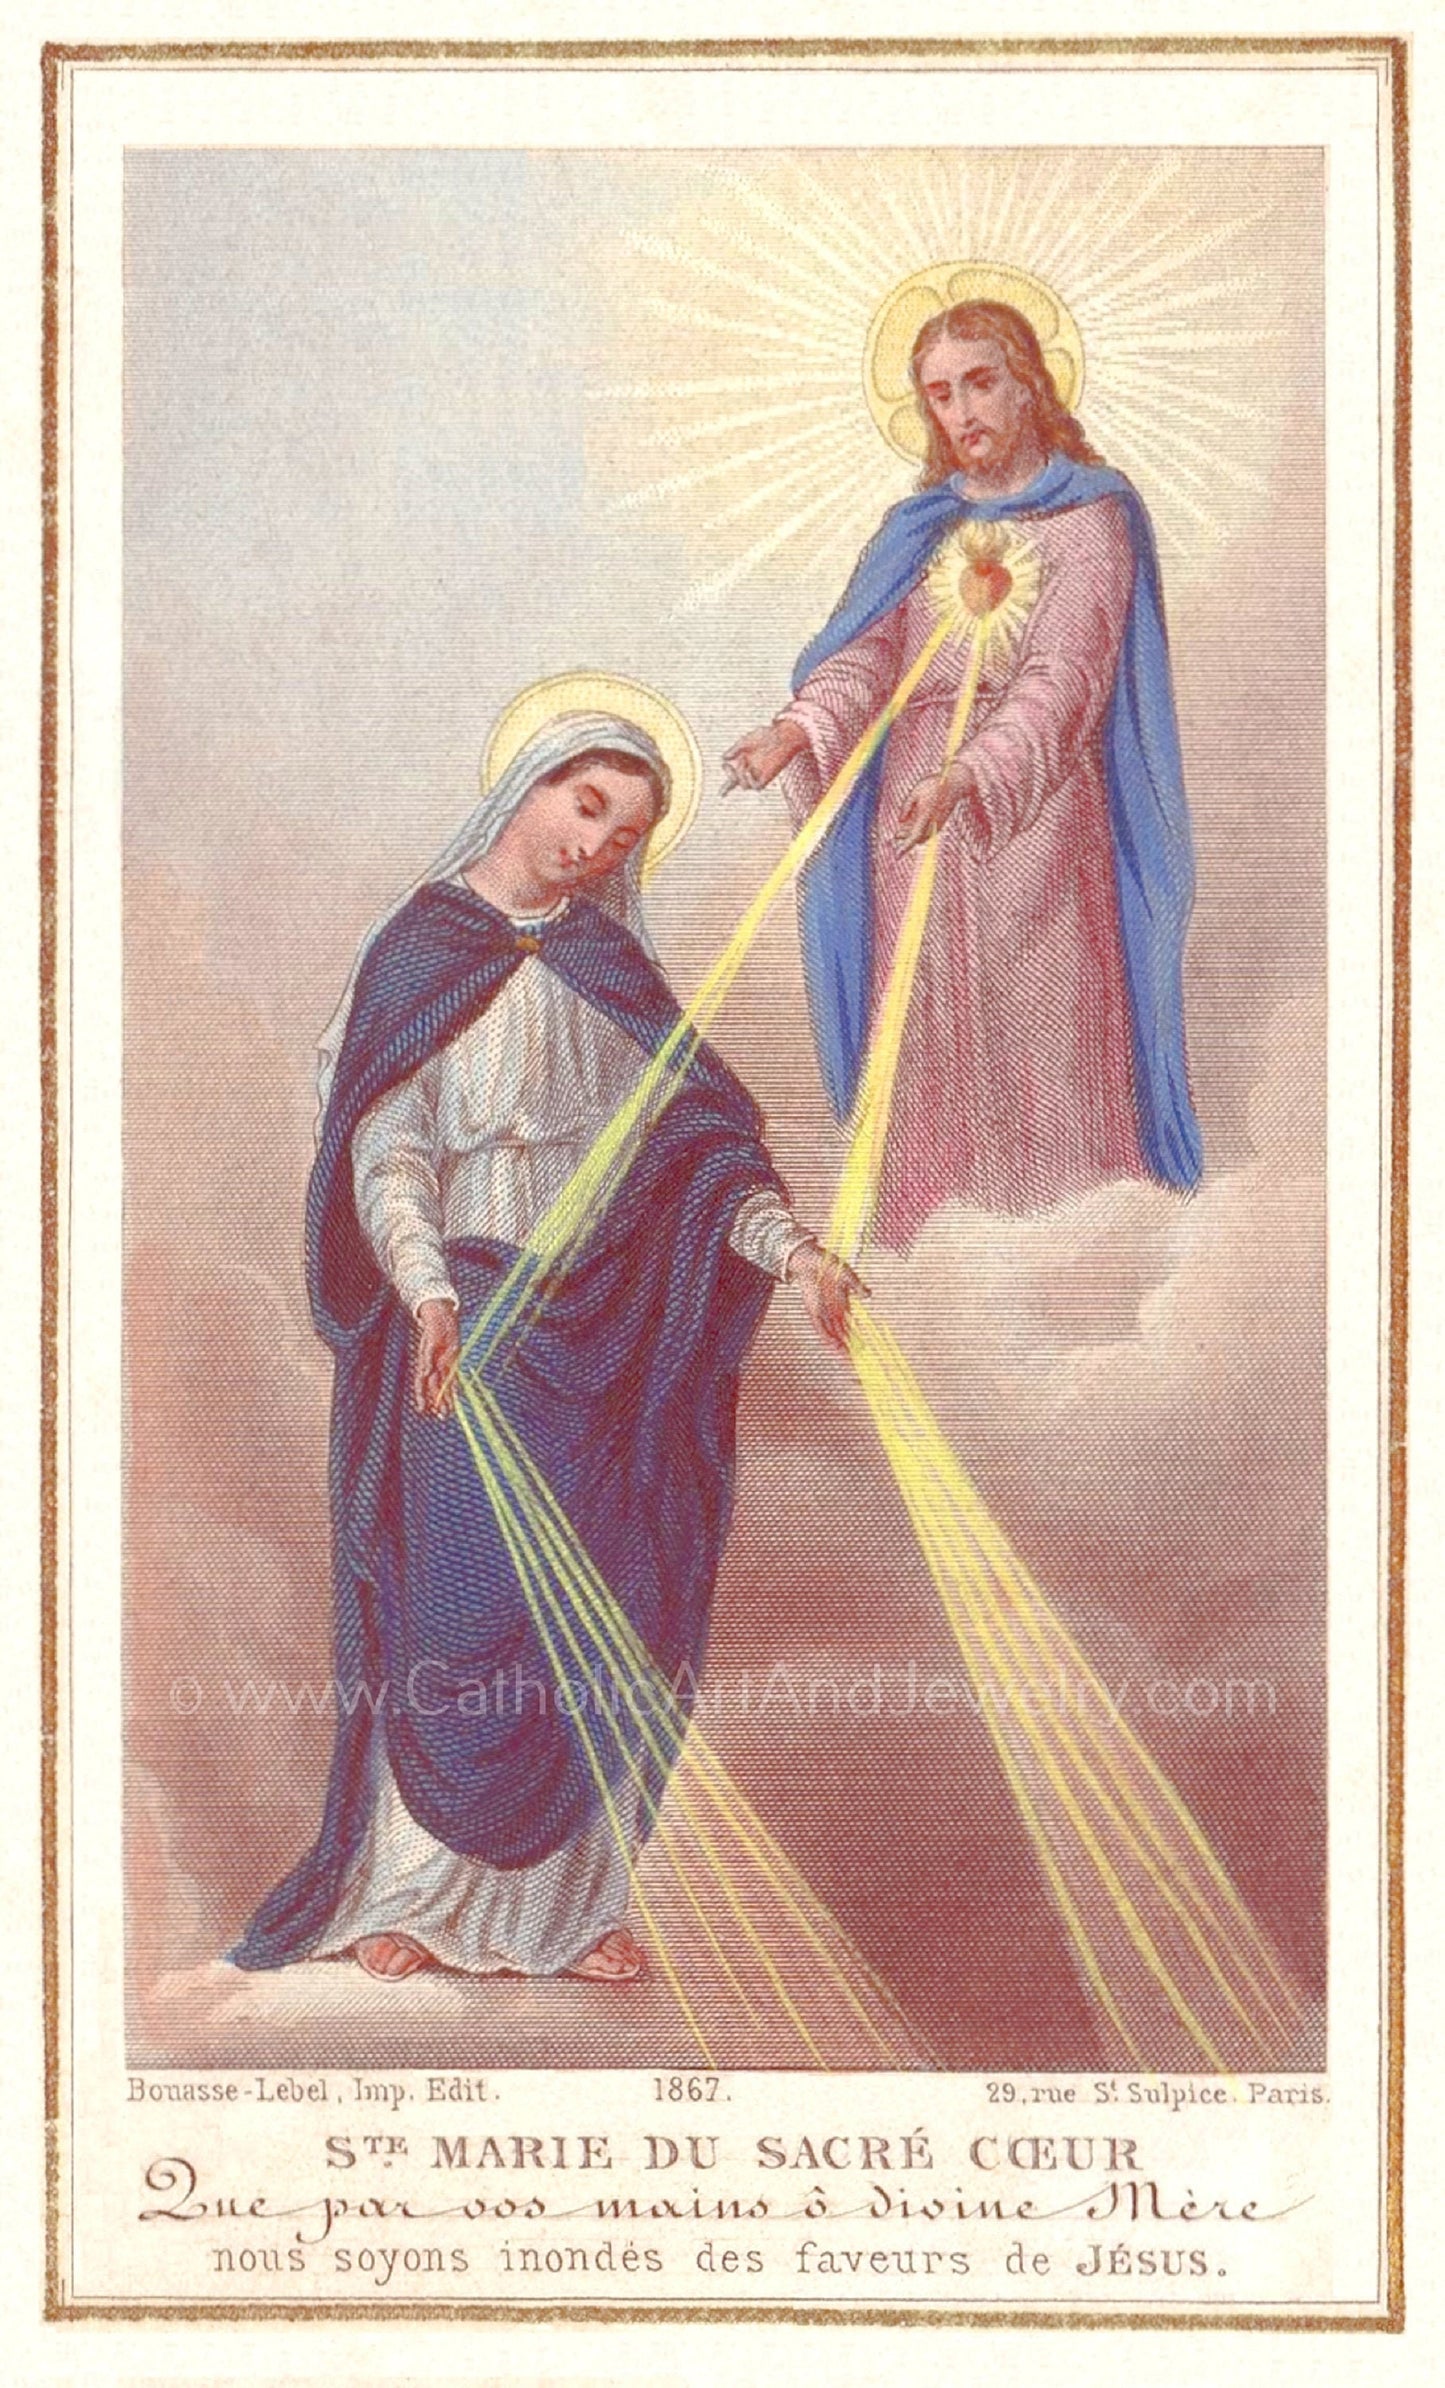 Mediatrix of Grace – St. Mary of the Sacred Heart – based on a Vintage Holy Card – Catholic Art Print – Archival Quality